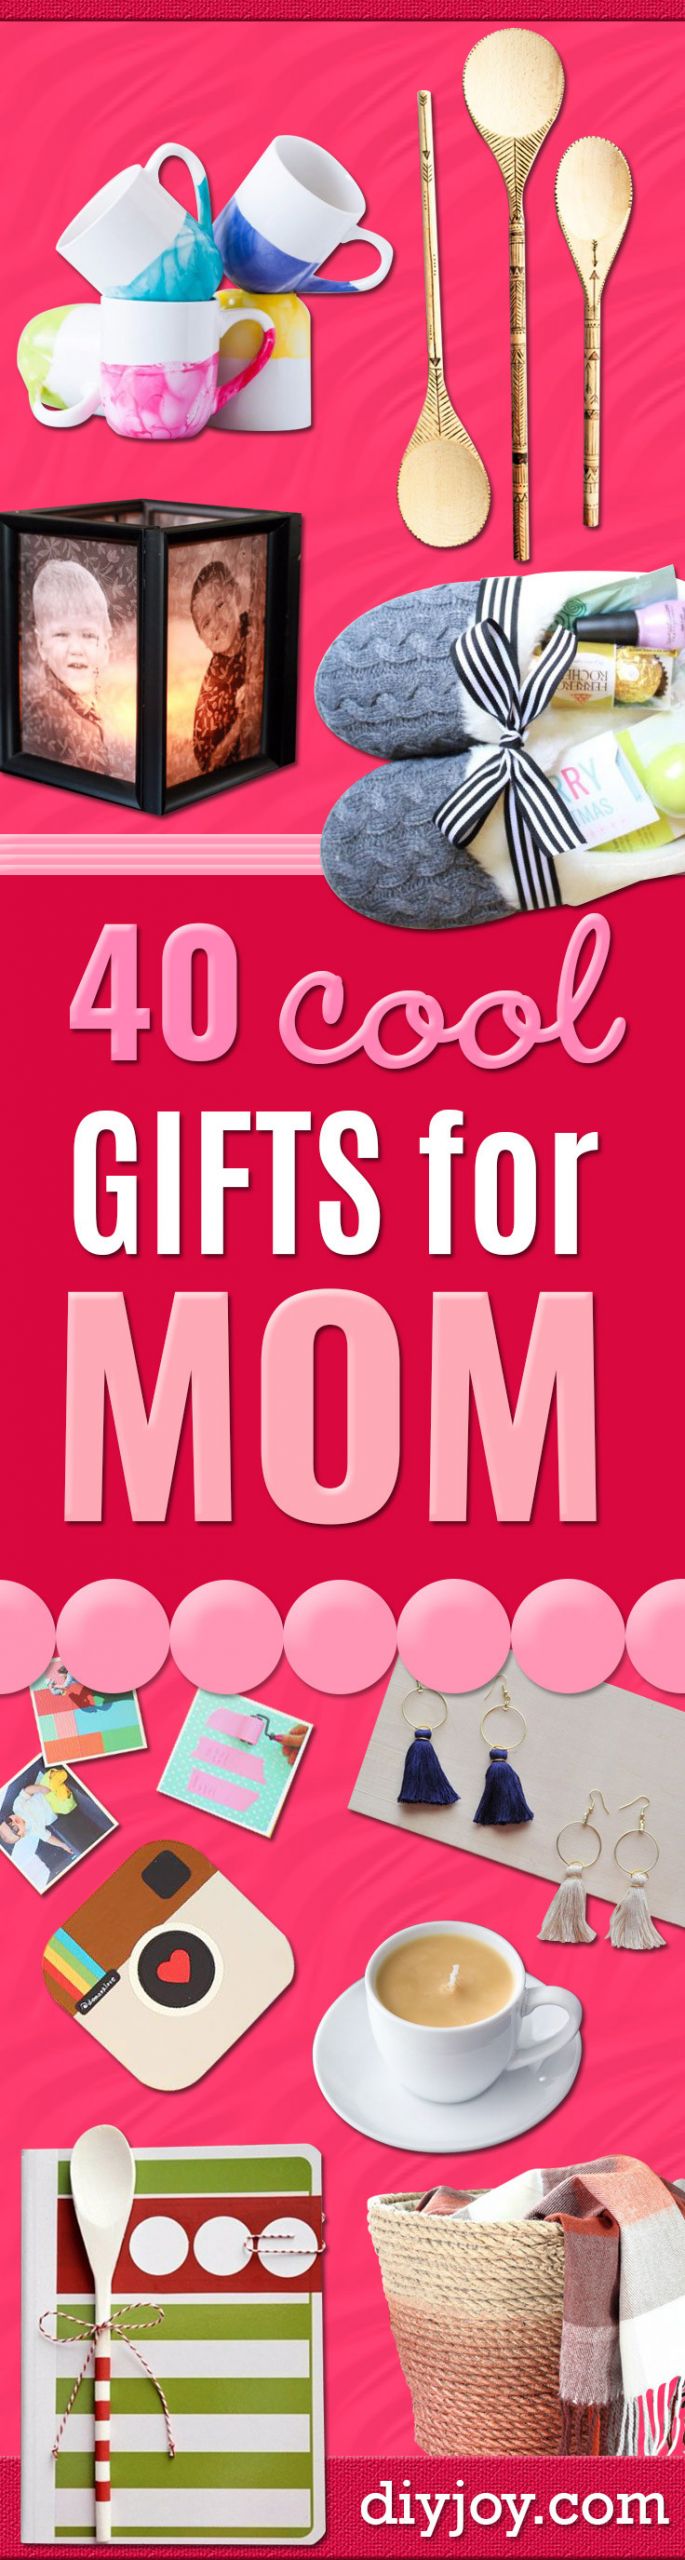 DIY Christmas Present For Mom
 40 Coolest Gifts To Make for Mom